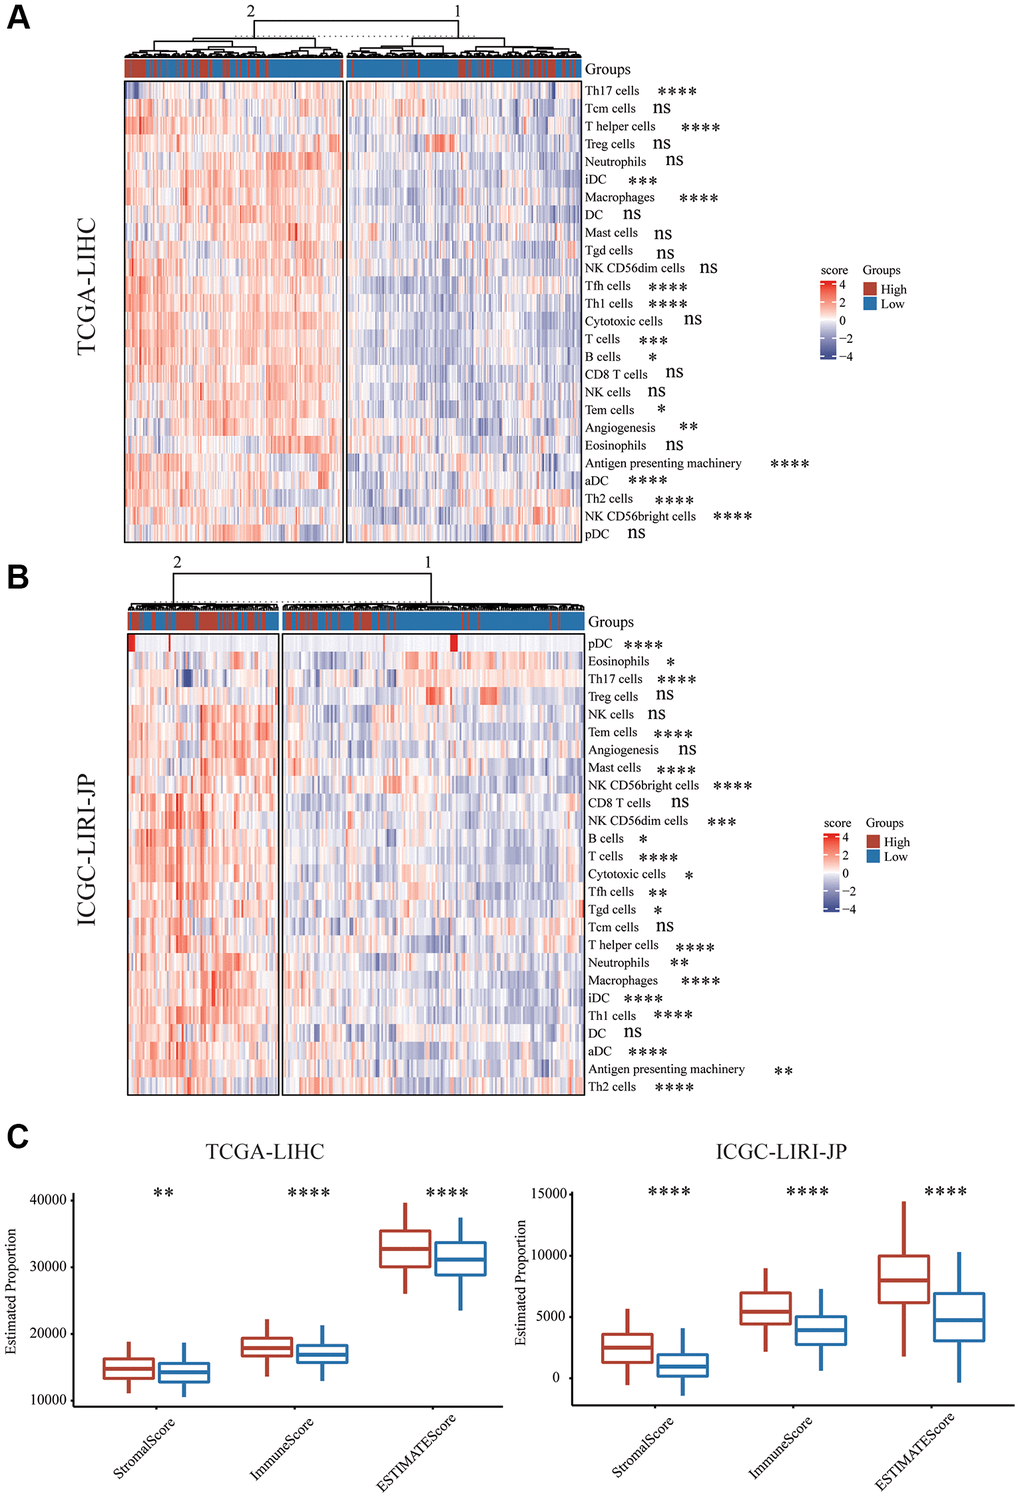 Immune characteristics of mTORC1 signaling-related subgroups. (A) Variations in immune infiltration scores were evaluated in TCGA-LIHC cohort. (B) The variation in multiple immune infiltration scores was assessed in ICGC-LIRI-JP cohort. (C) Immune score, stromal score and ESTIMATE score differences across the group with high and low risk.